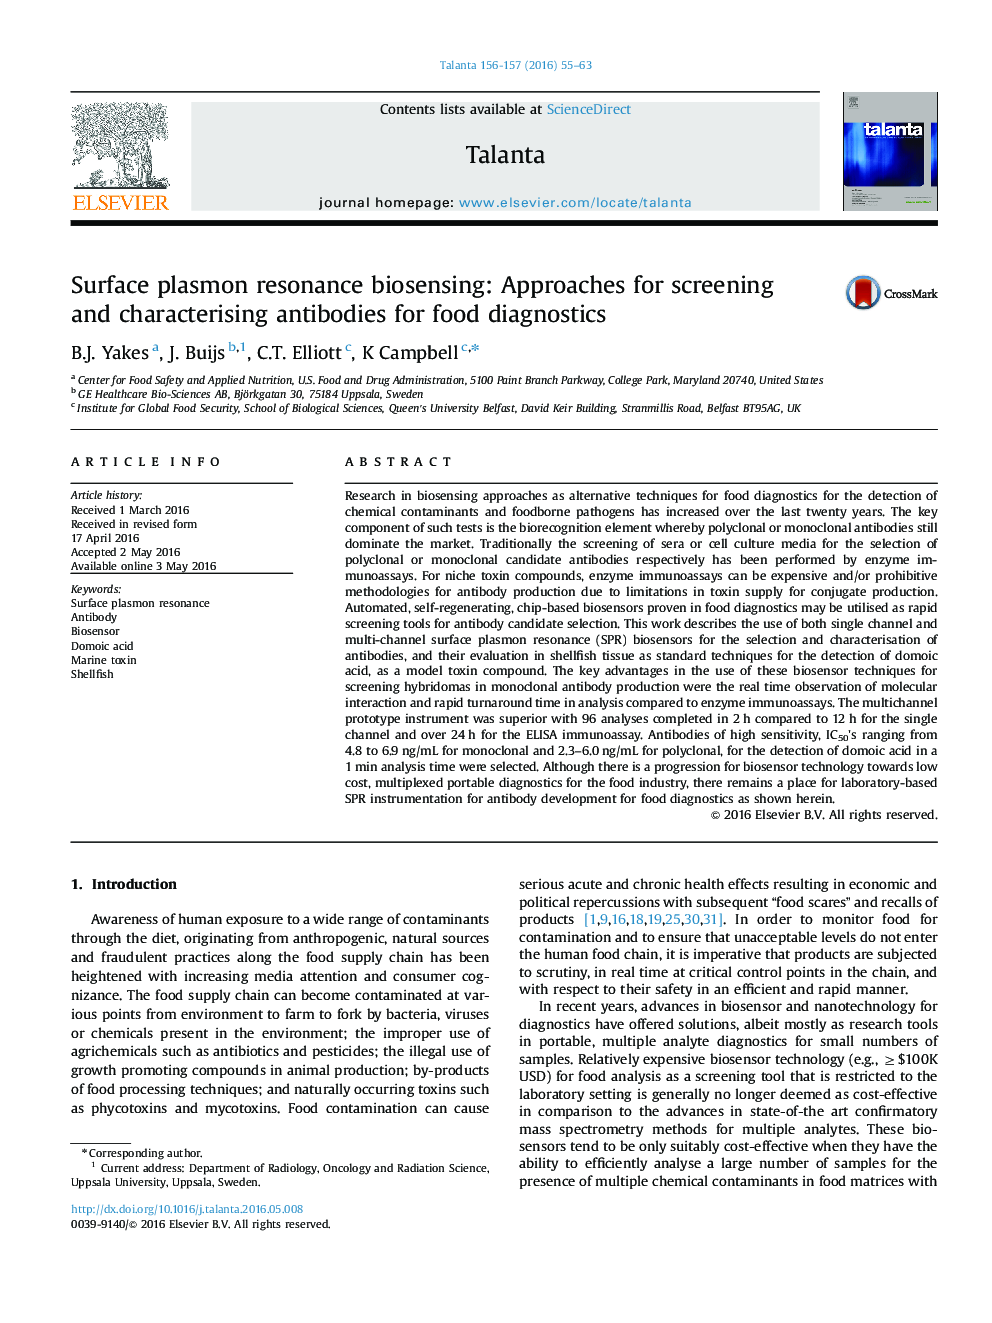 Surface plasmon resonance biosensing: Approaches for screening and characterising antibodies for food diagnostics